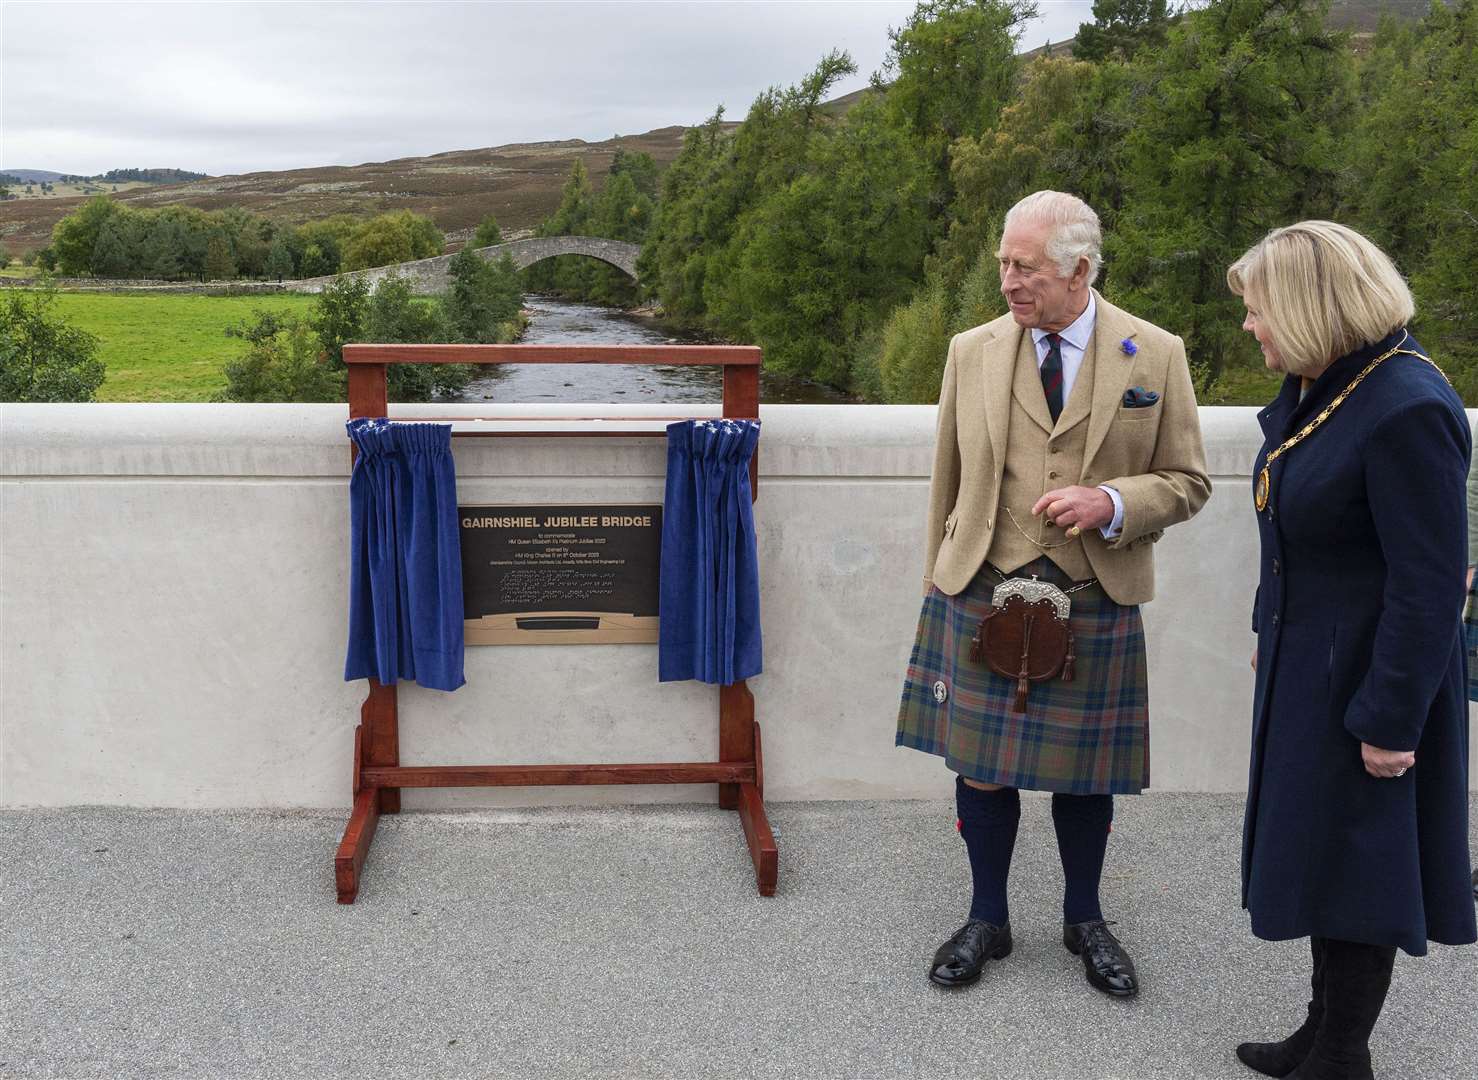 His Majesty The King unveils a plaque to formally name the Gairnshiel Jubilee Bridge watched by Provost of Aberdeenshire Cllr Judy Whyte